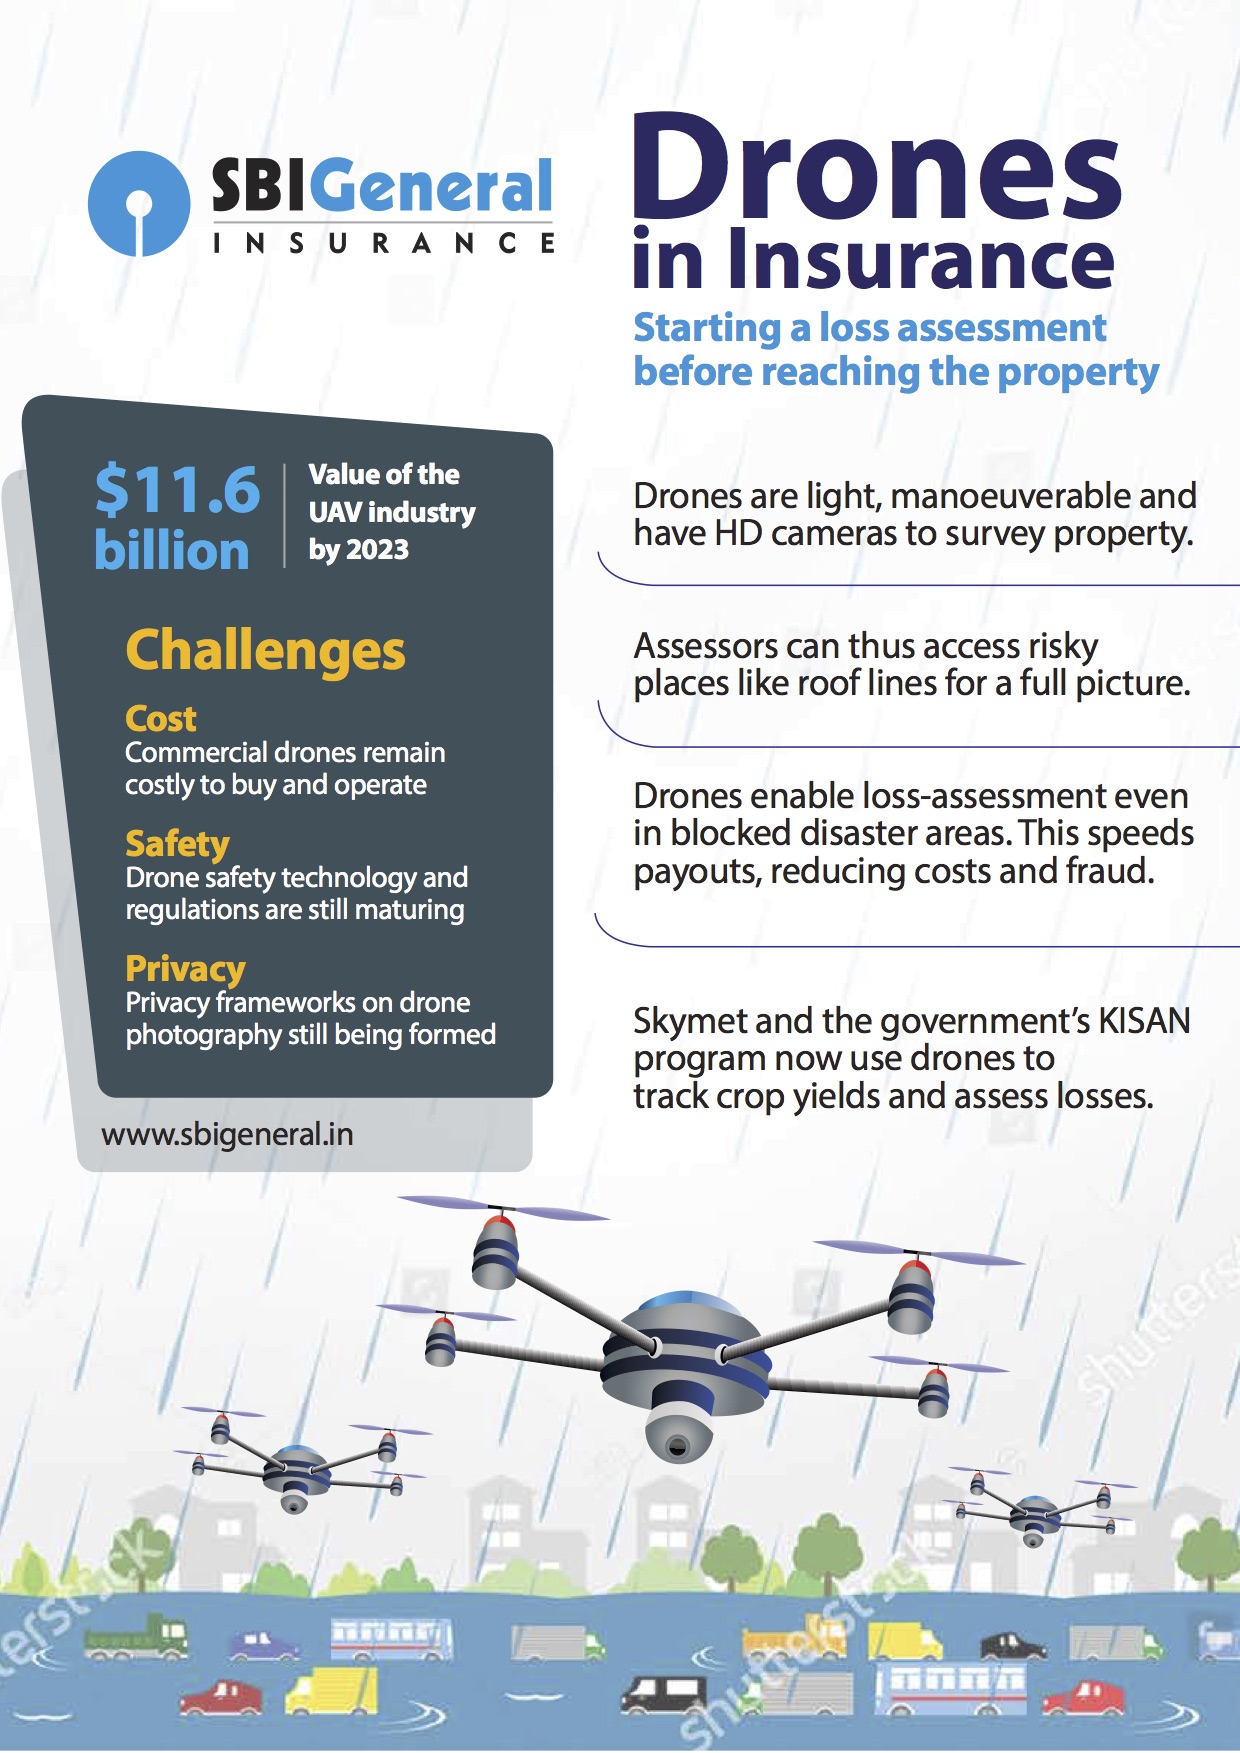 Drones in Insurance – transforming loss-assessment?